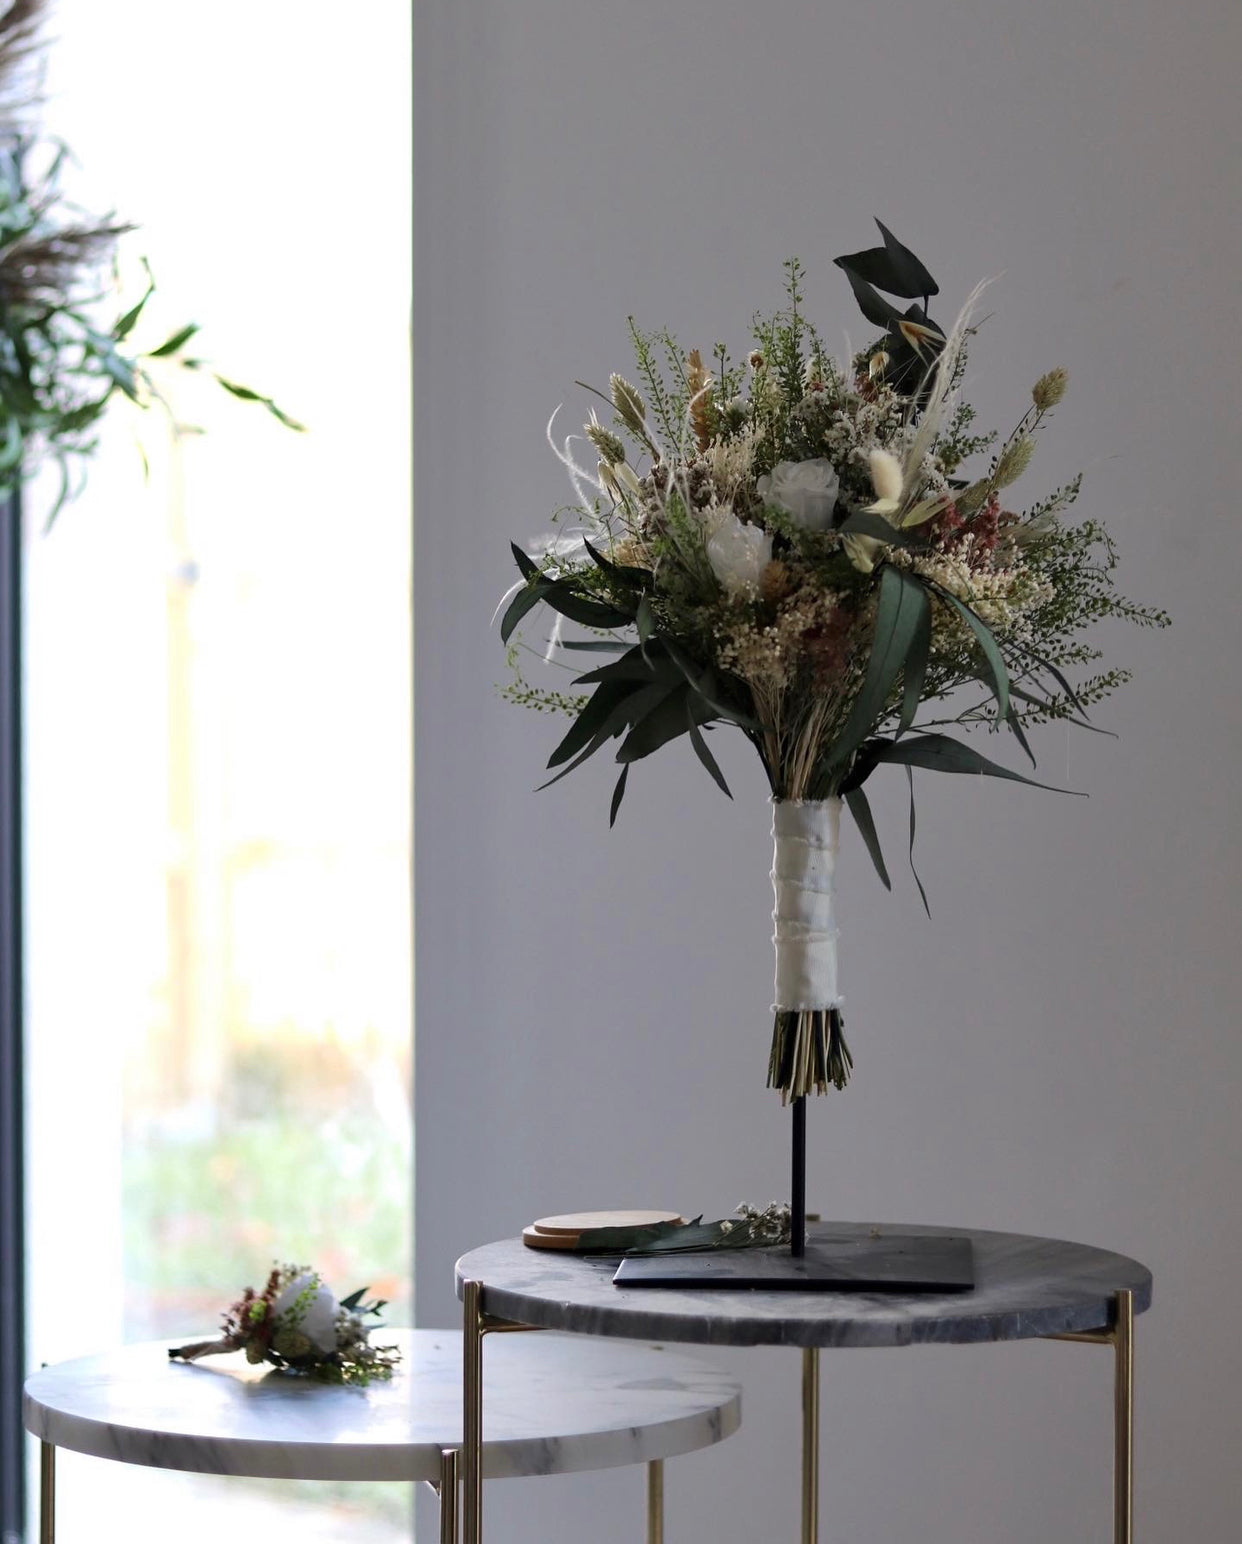 Why you should consider using dried and preserved flowers for your wedding?